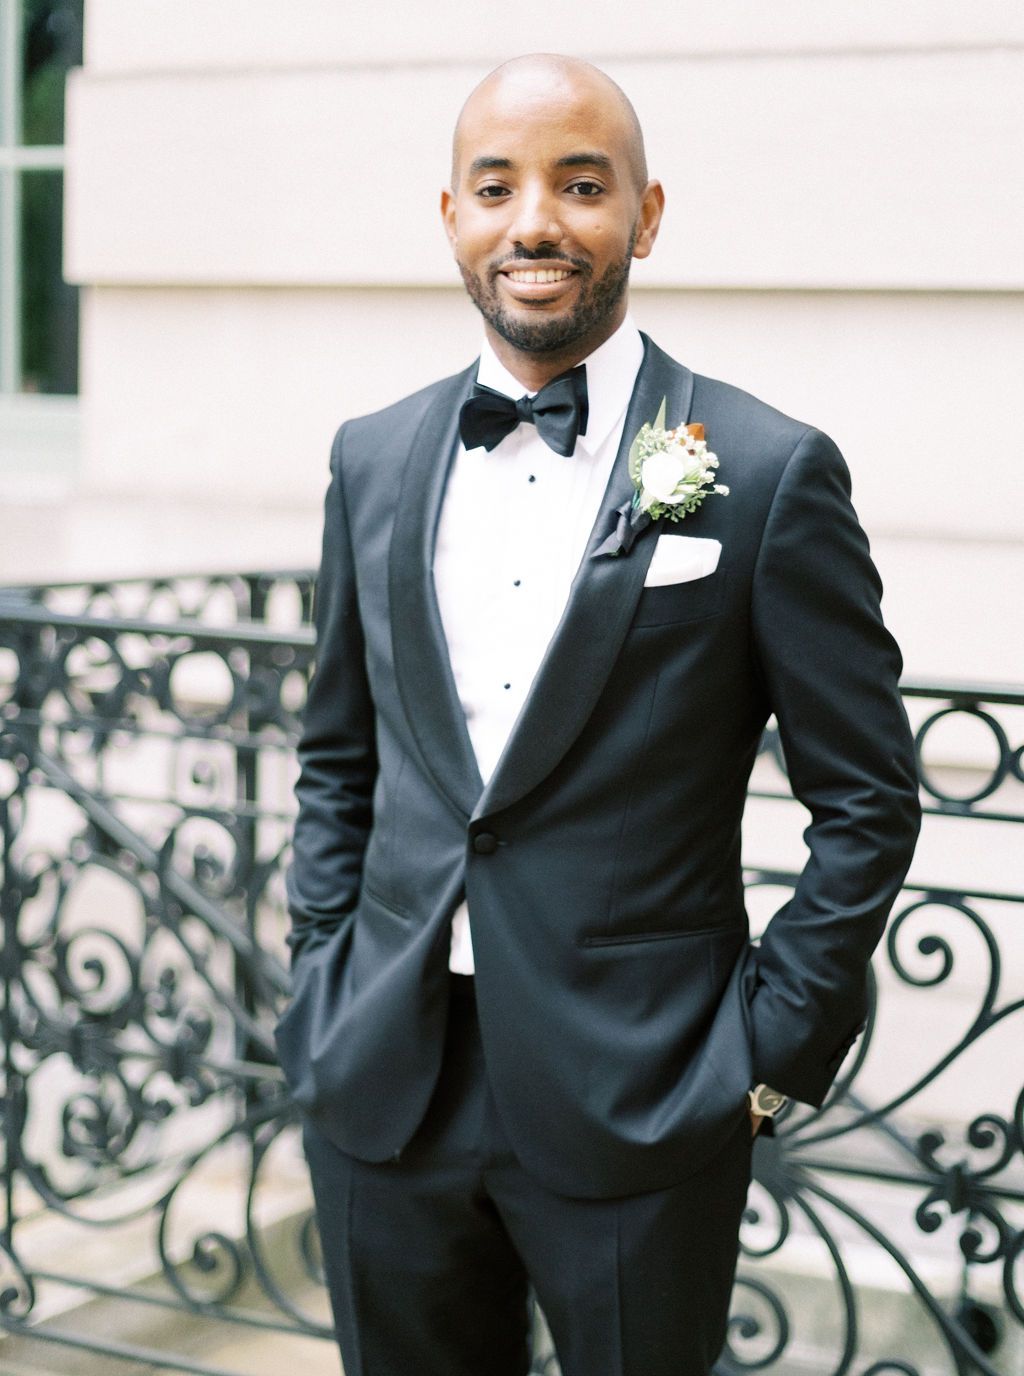 Tuxedo Rental Near Me : Tuxedos Wedding Suits Grooms And ...